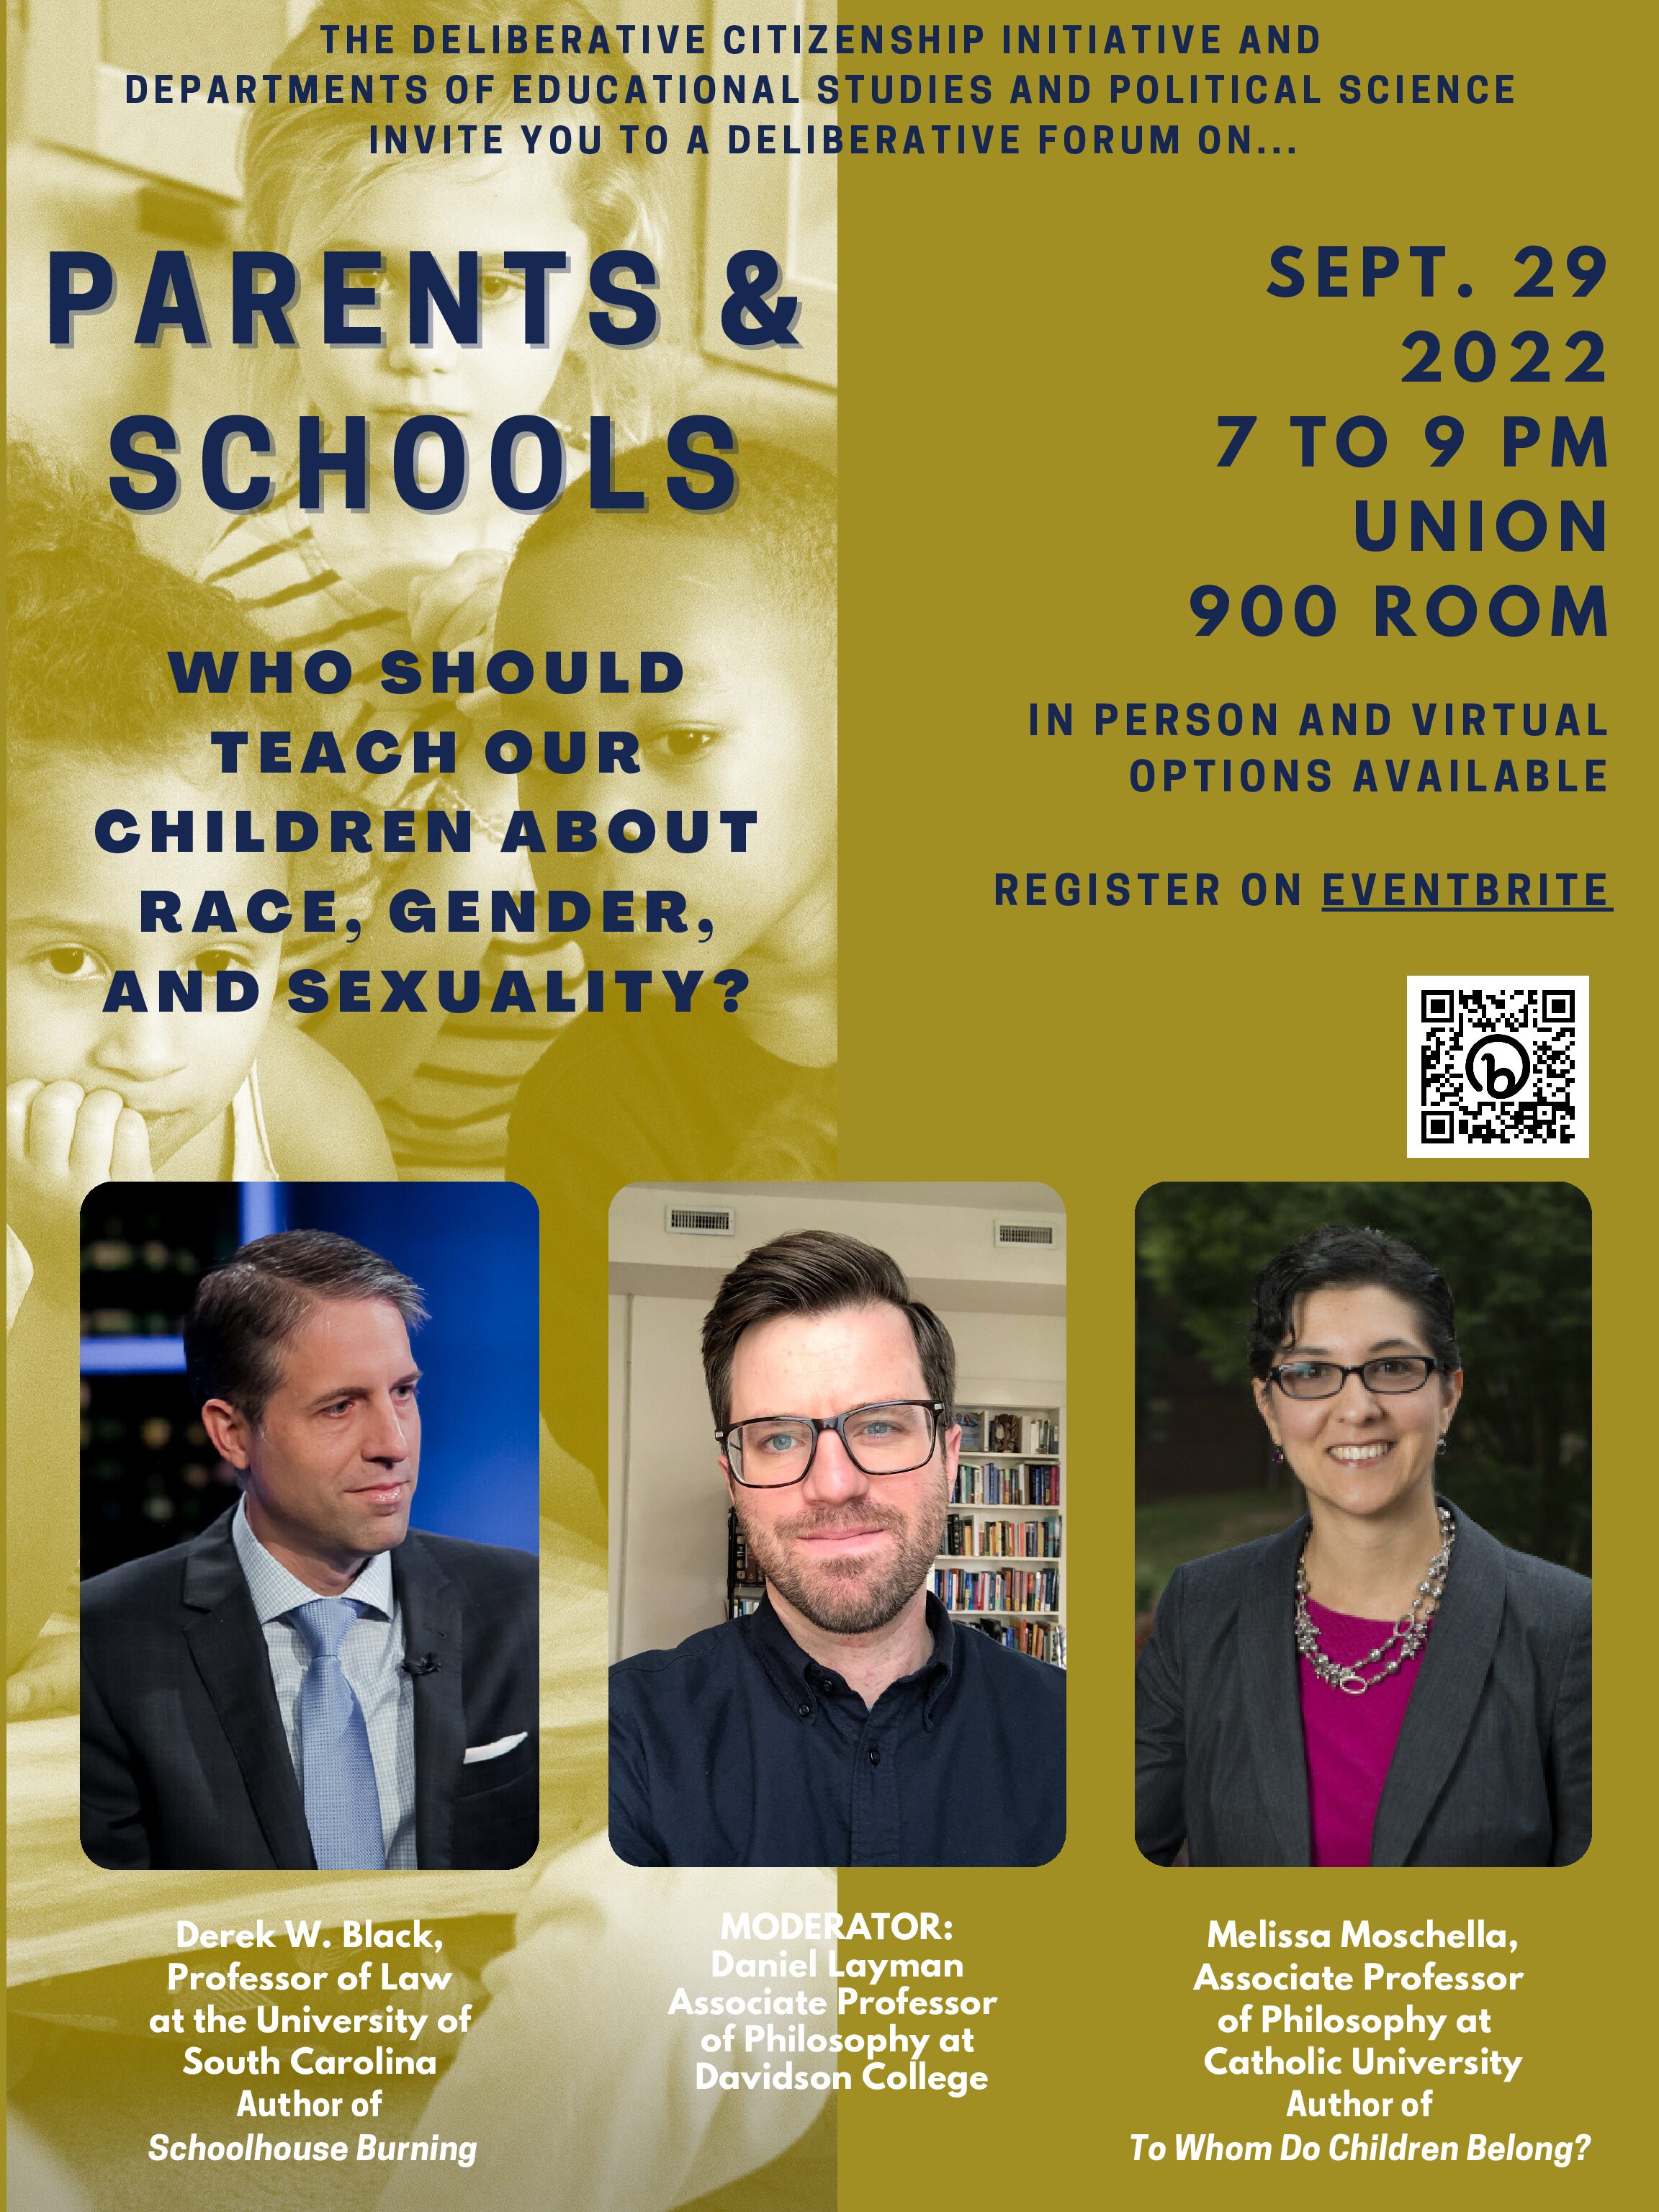 Upcoming Deliberative Forum on Parents and Schools: Who Should Teach Our Kids about Race, Gender, and Sexuality?